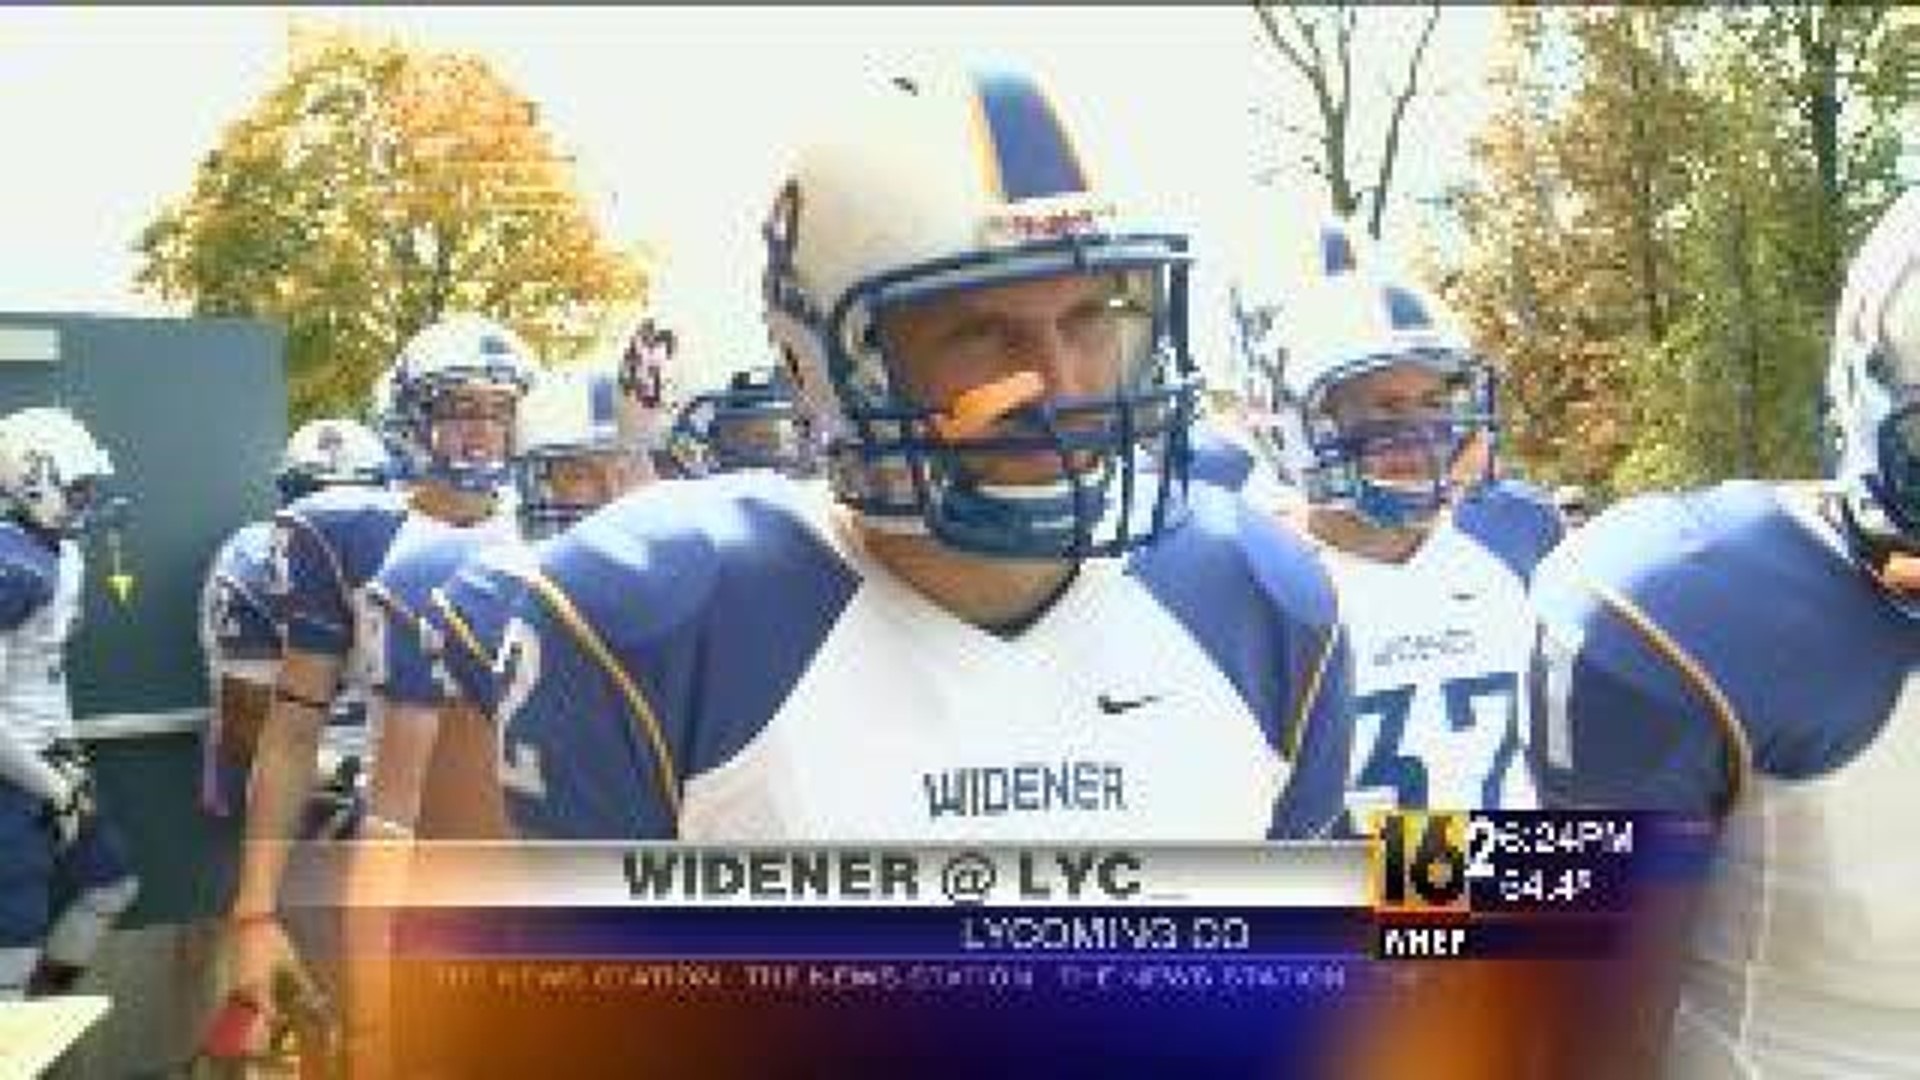 Widener and Lycoming Highlights